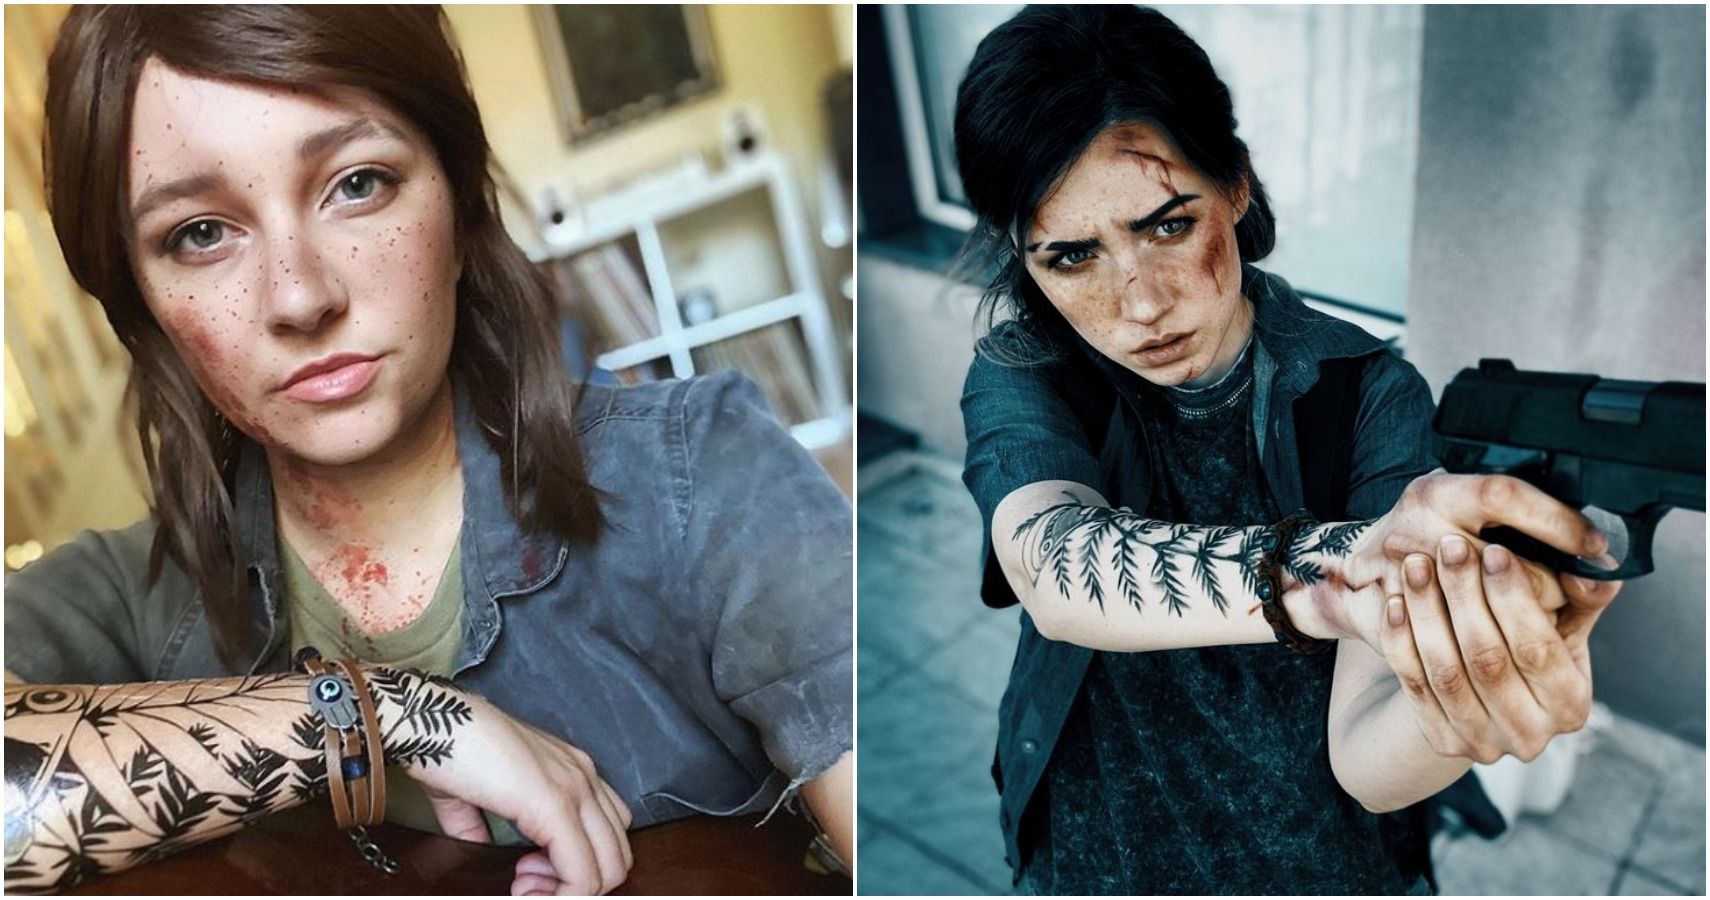 Ellie from The Last of Us Part II Cosplay